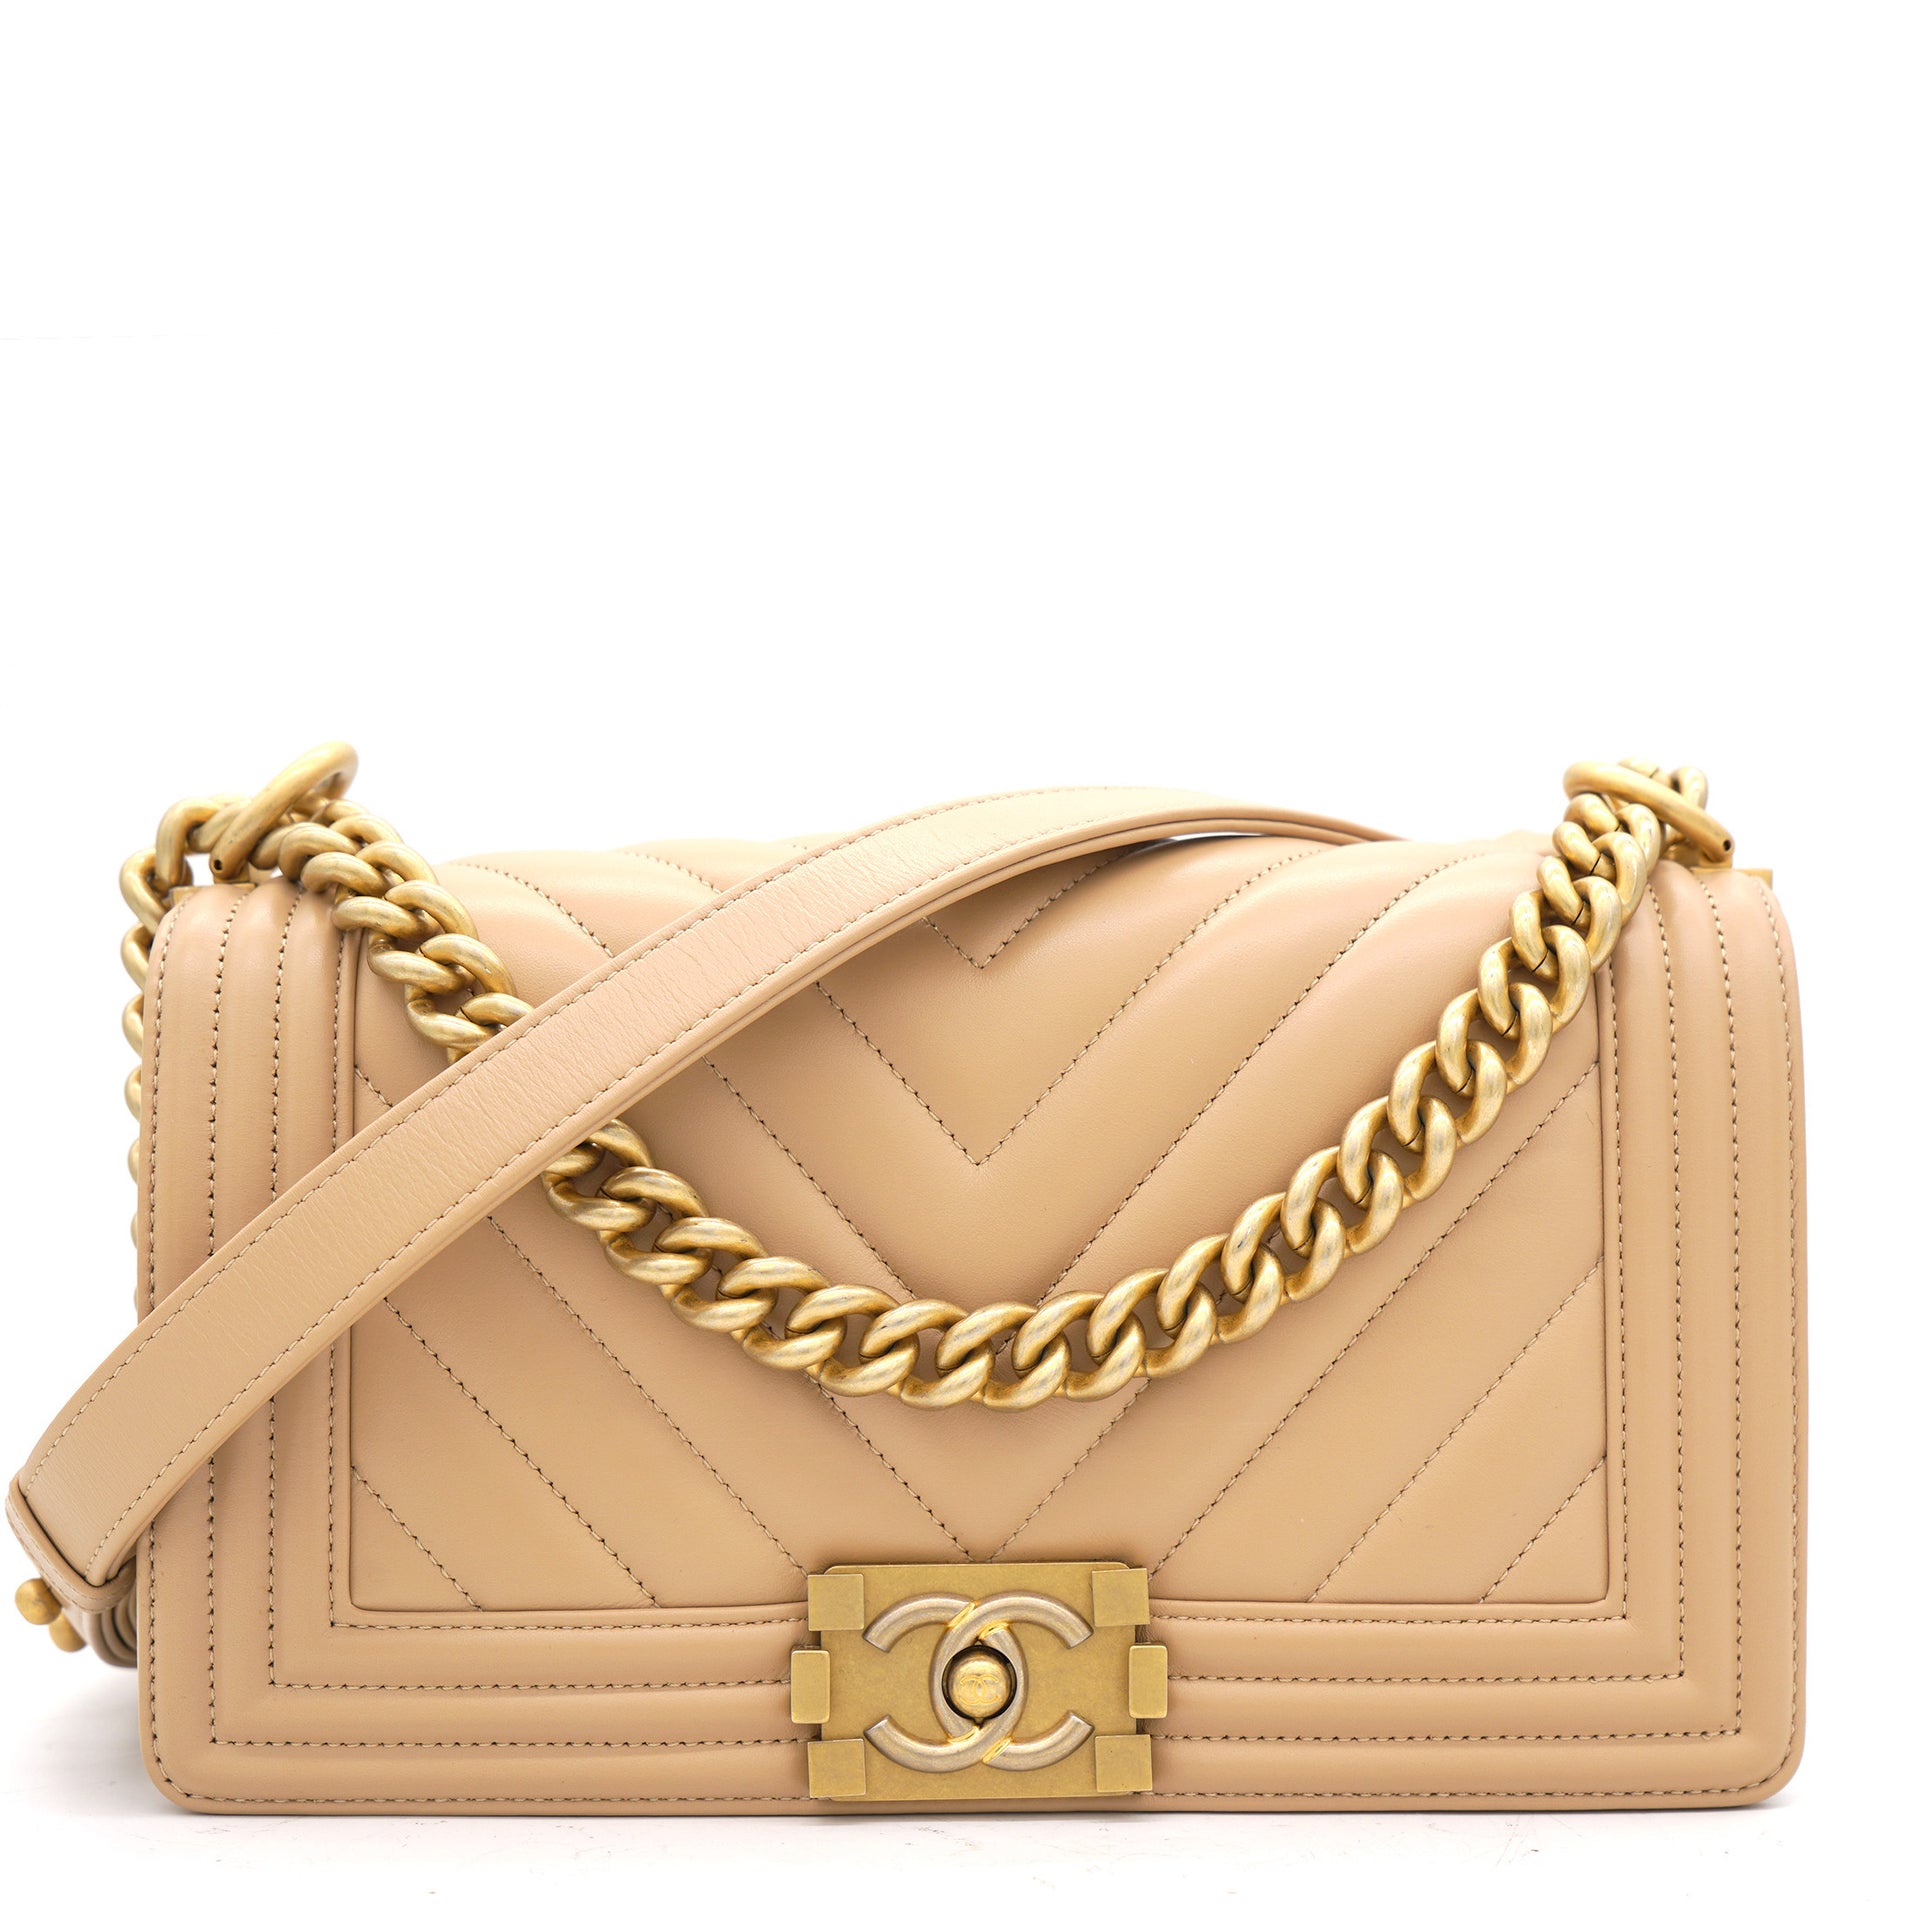 RESERVED**Chanel o-mini pouch in gold/beige tone with Boy lock 